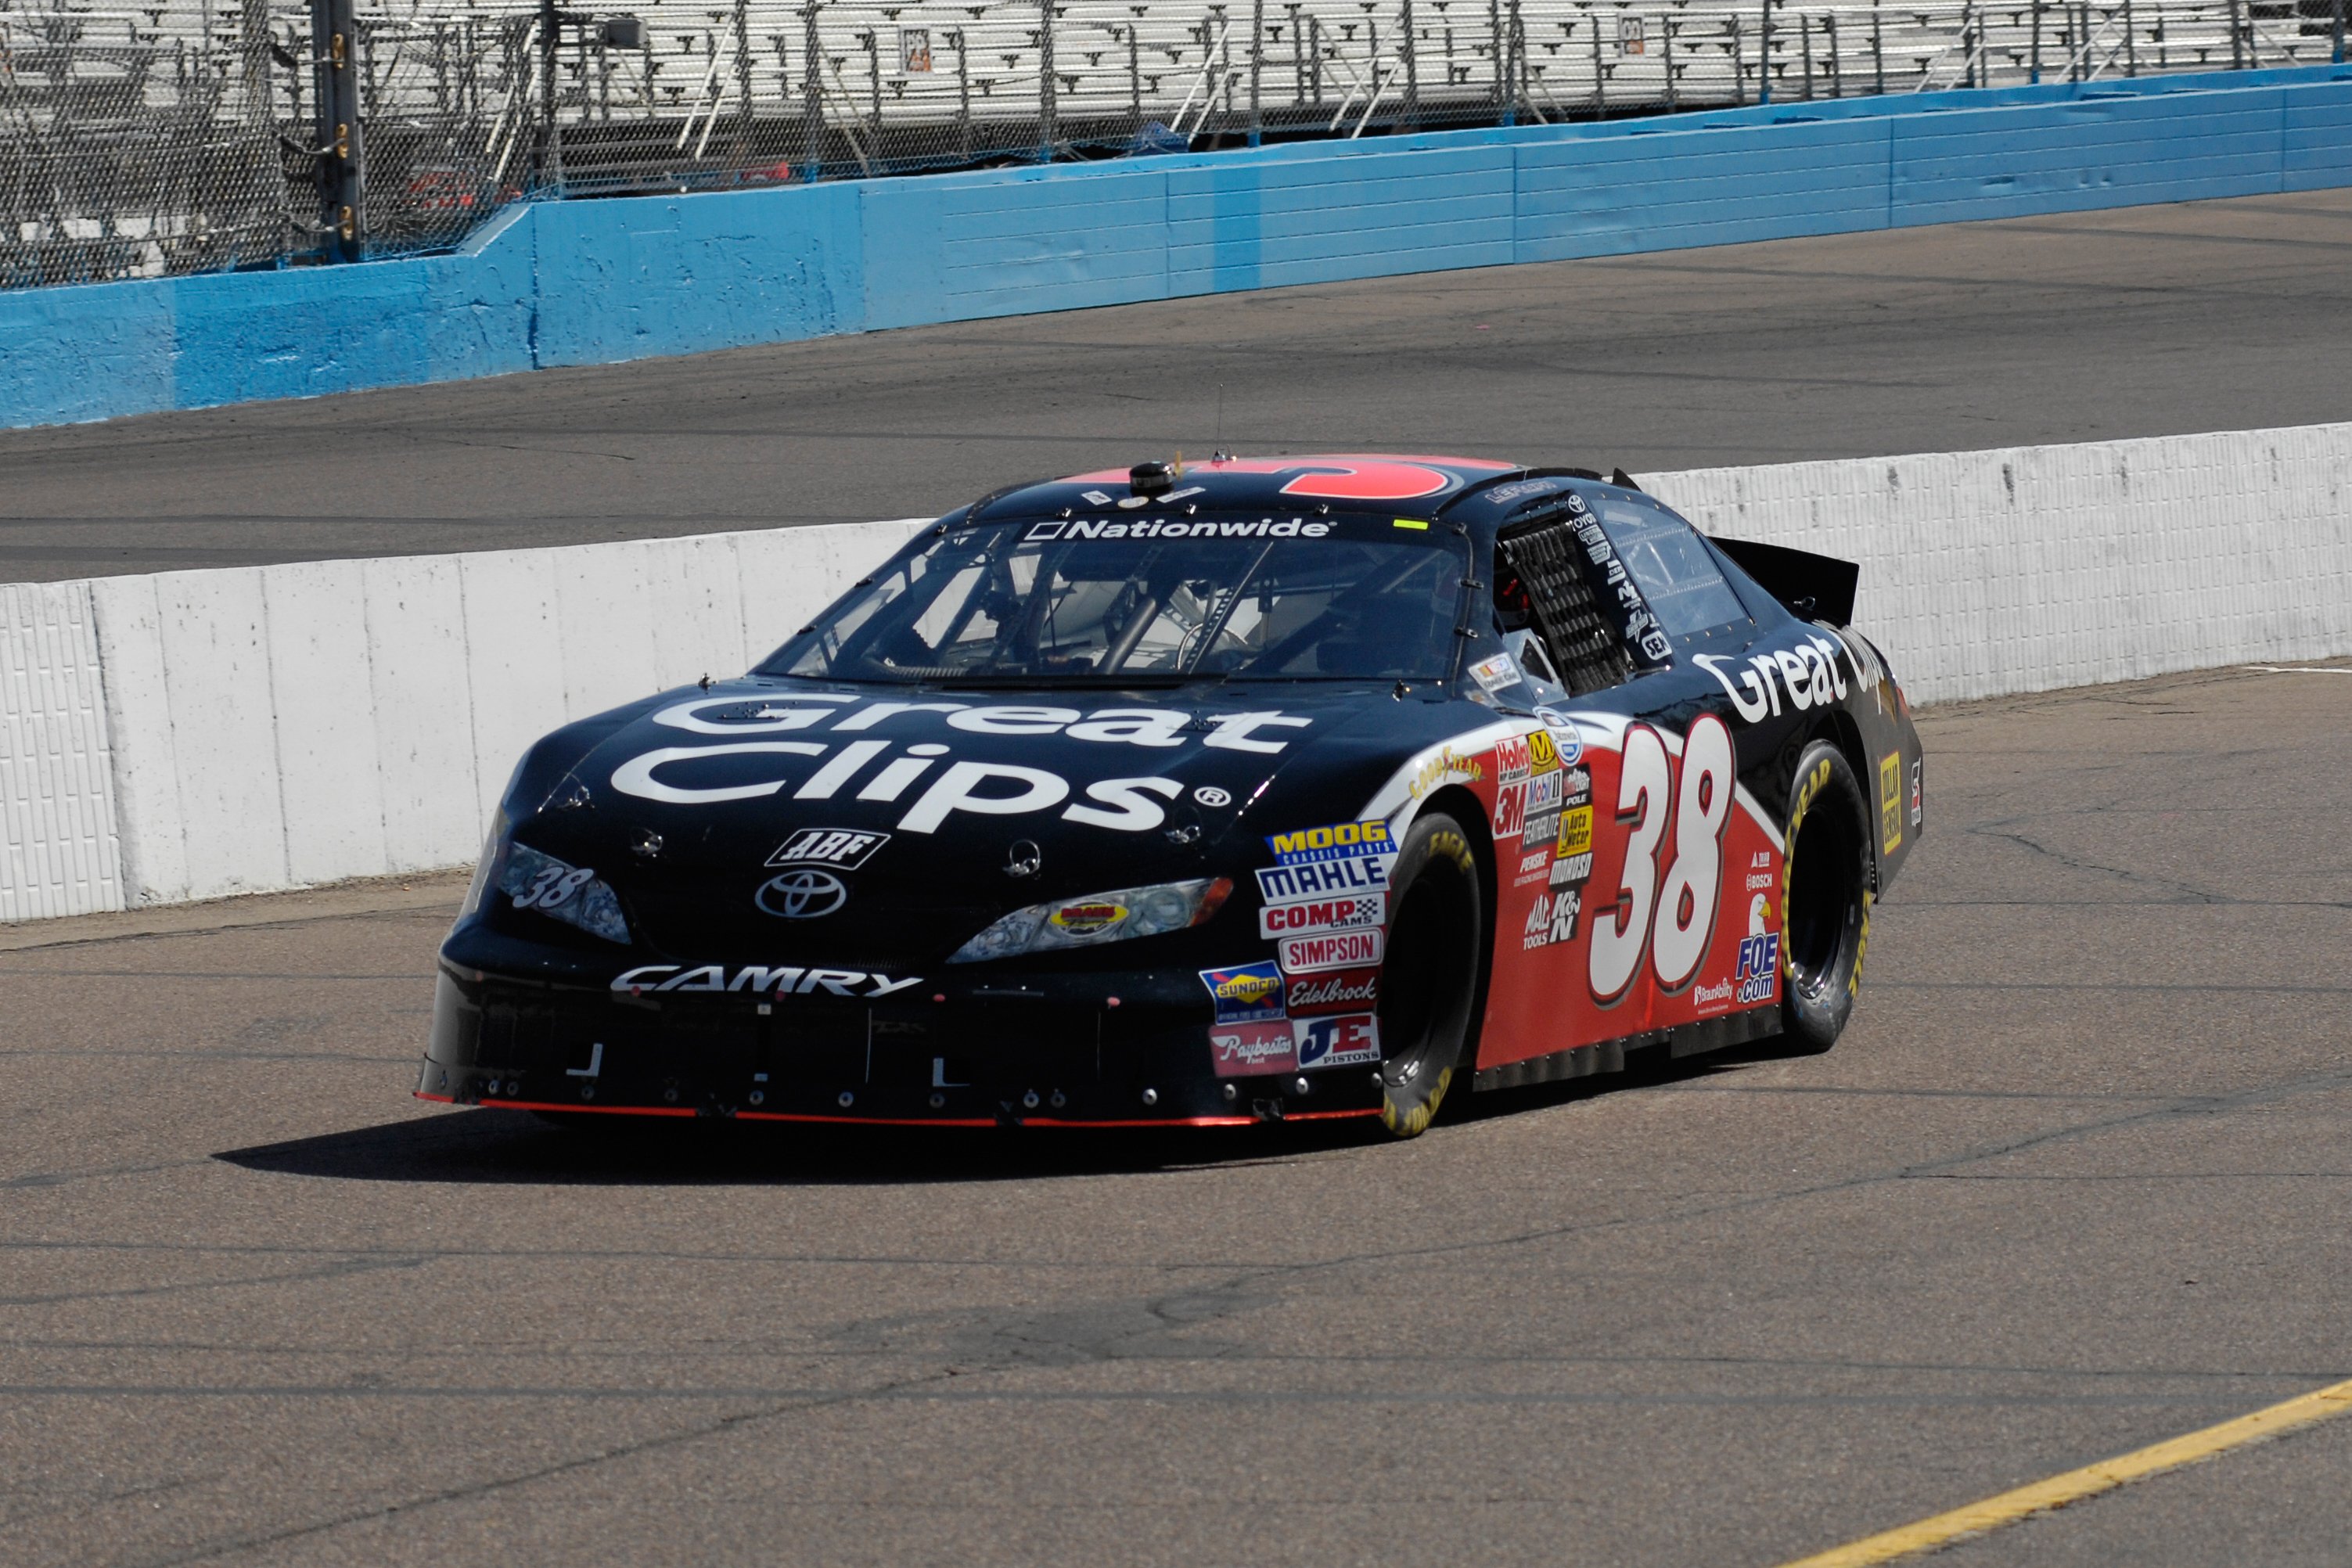 Jason Leffler practices before finishing second in the NASCAR Nationwide Series race at Phoenix International Raceway on April 17, 2009 in Avondale, Arizona | Photo: Shutterstock